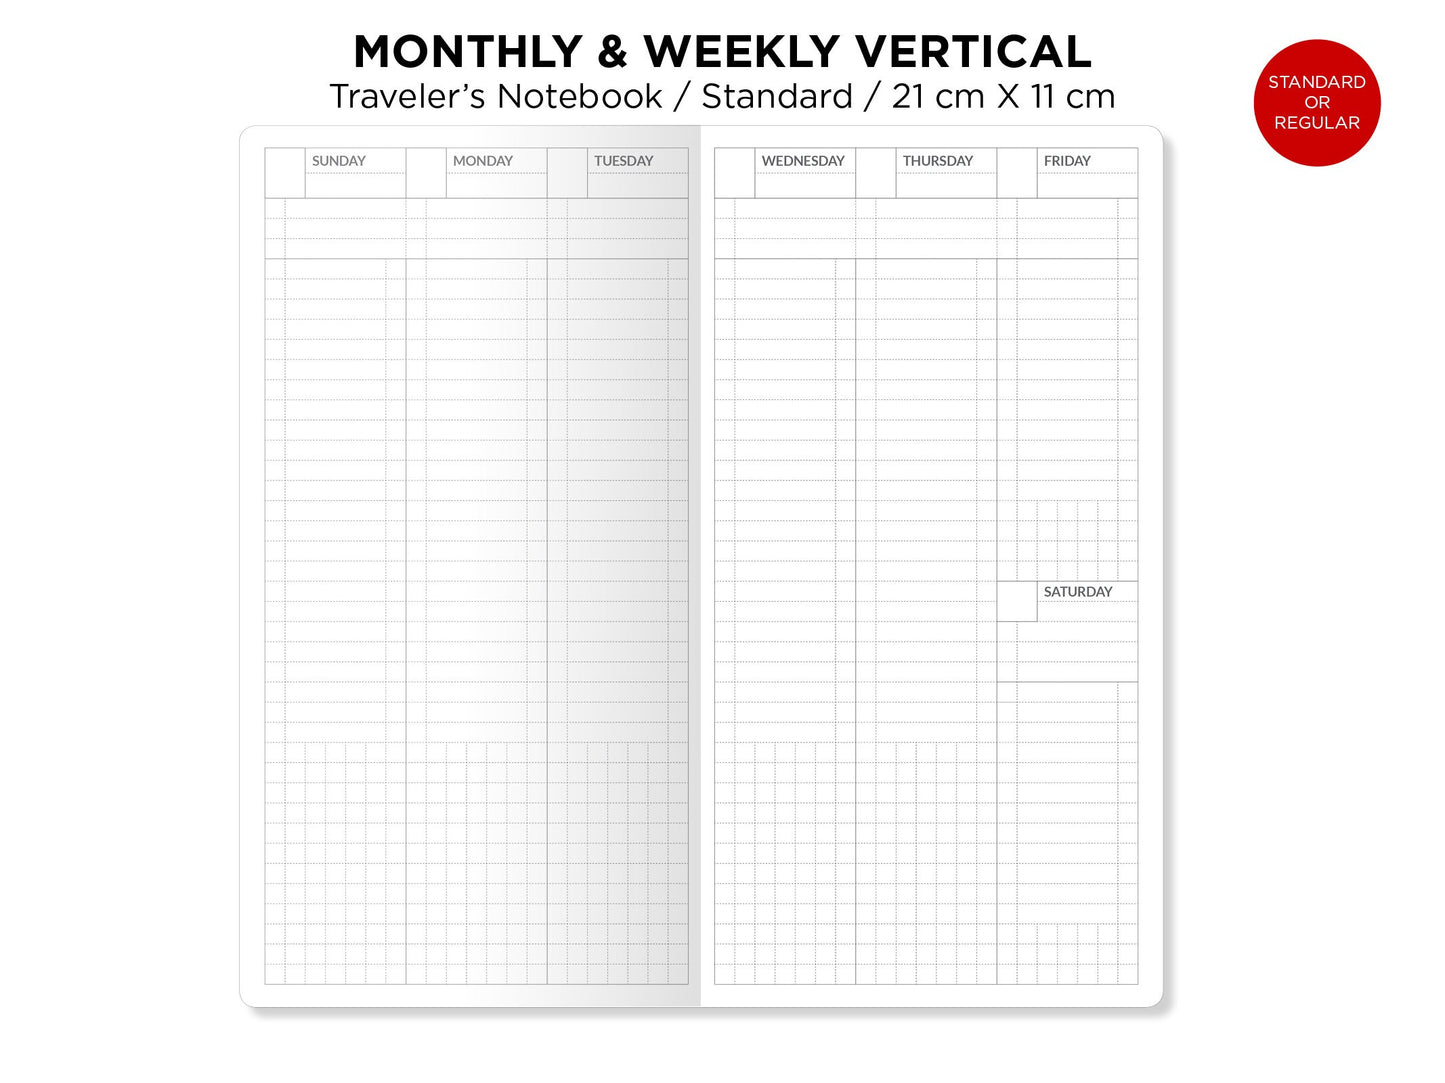 Weekly VERTICAL & Monthly Planner Undated Traveler's Notebook Printable Insert Refill - Standard Size - Minimalist Sunday or Monday Start